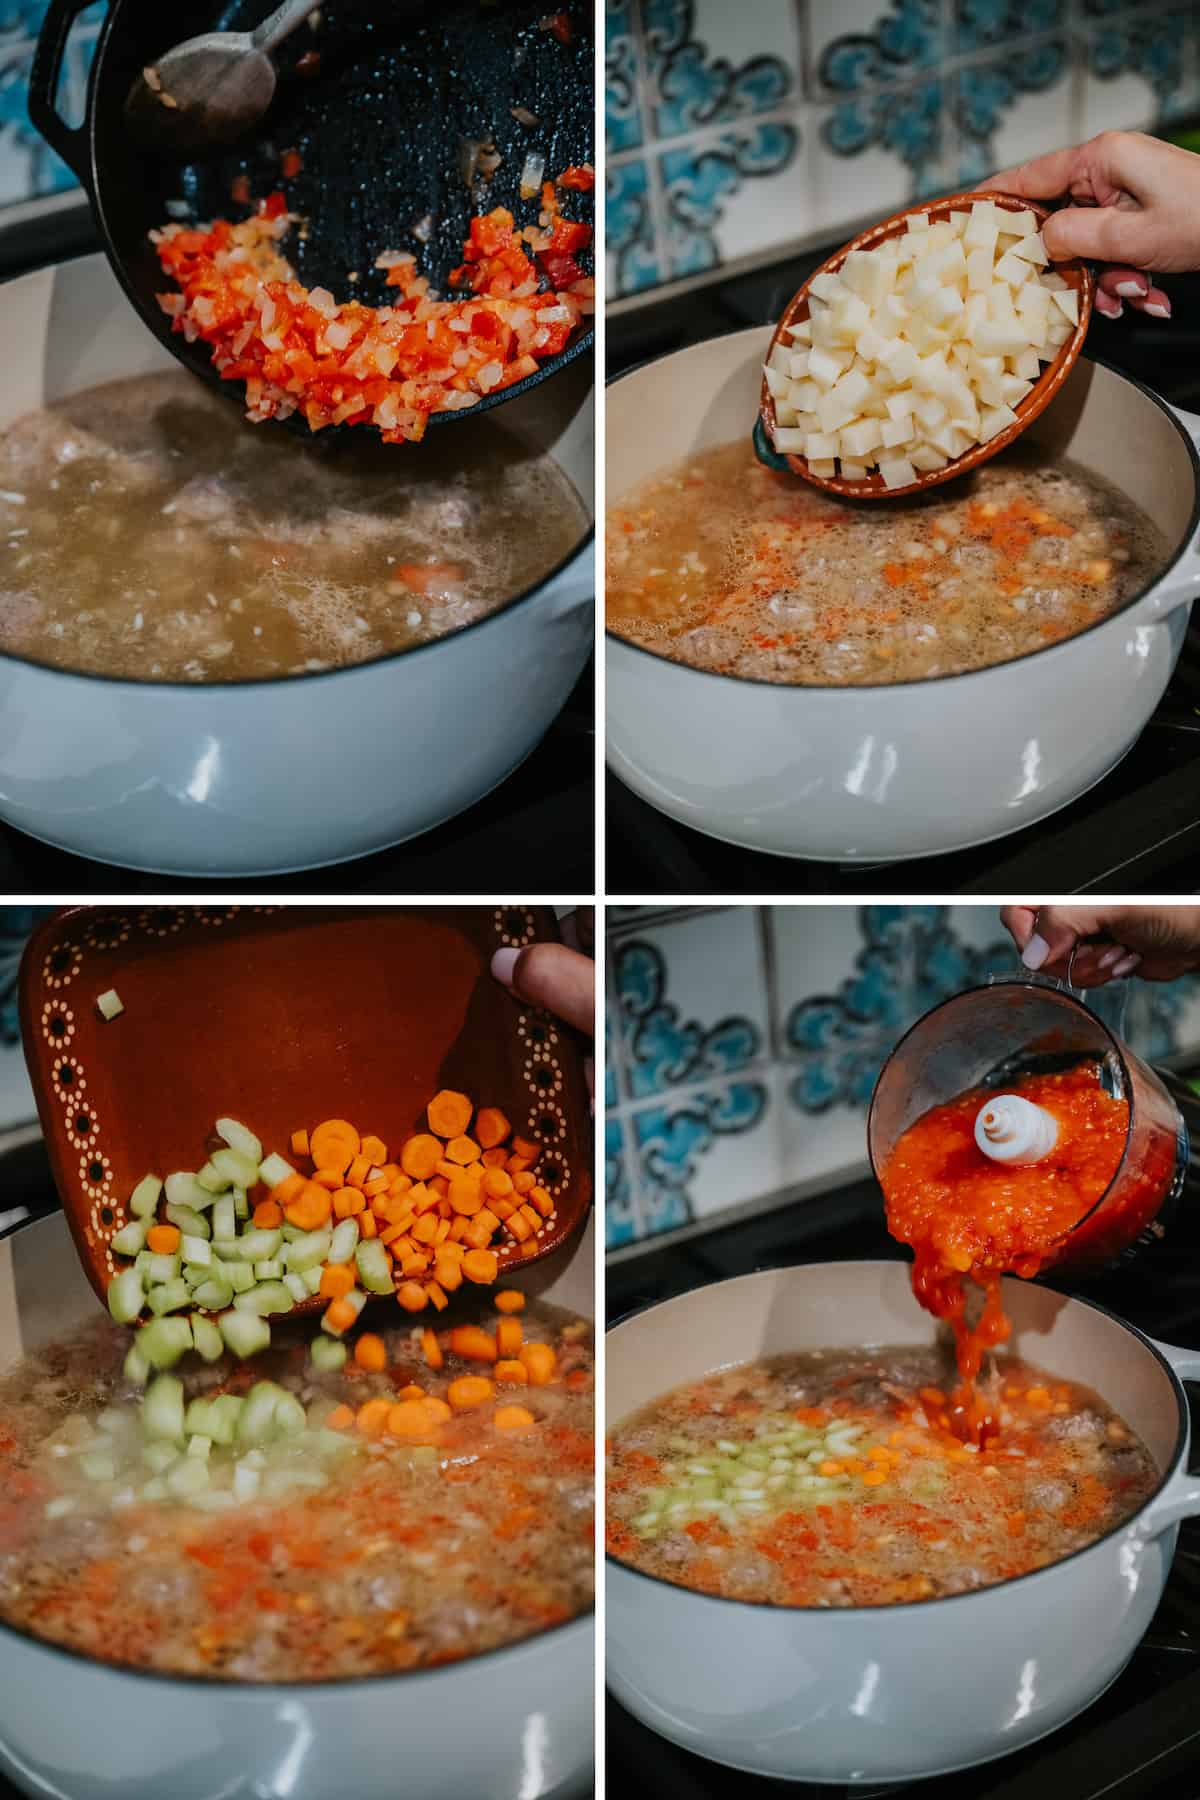 grid style process shot showing the sauteed tomatoes and onions being added to the pot with the broth, raw potatoes going into the soup, carrots and celery being added, and the puréed broiled tomatoes getting added to the caldo de albondigas soup pot.